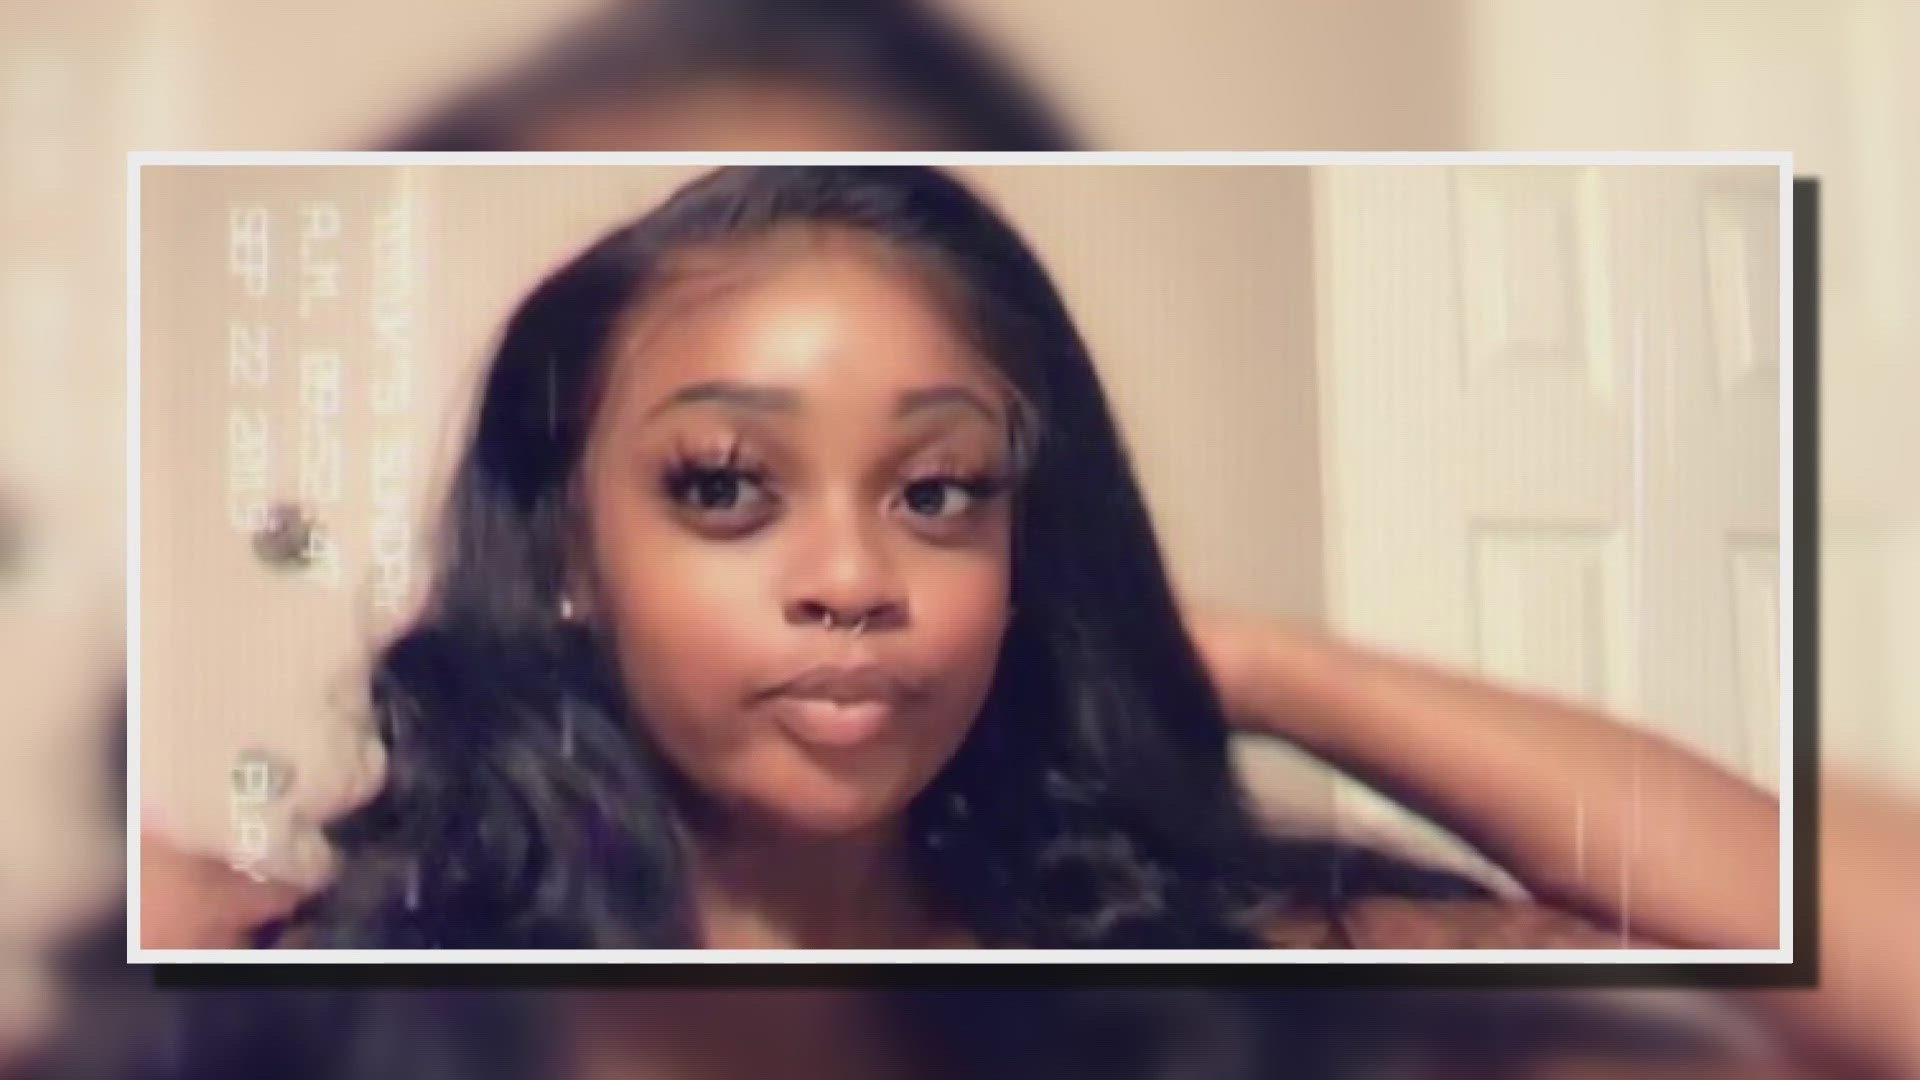 The parents of the woman killed in a mass shooting outside a Warehouse District nightclub spoke with WWL Louisiana to share their daughter's story.